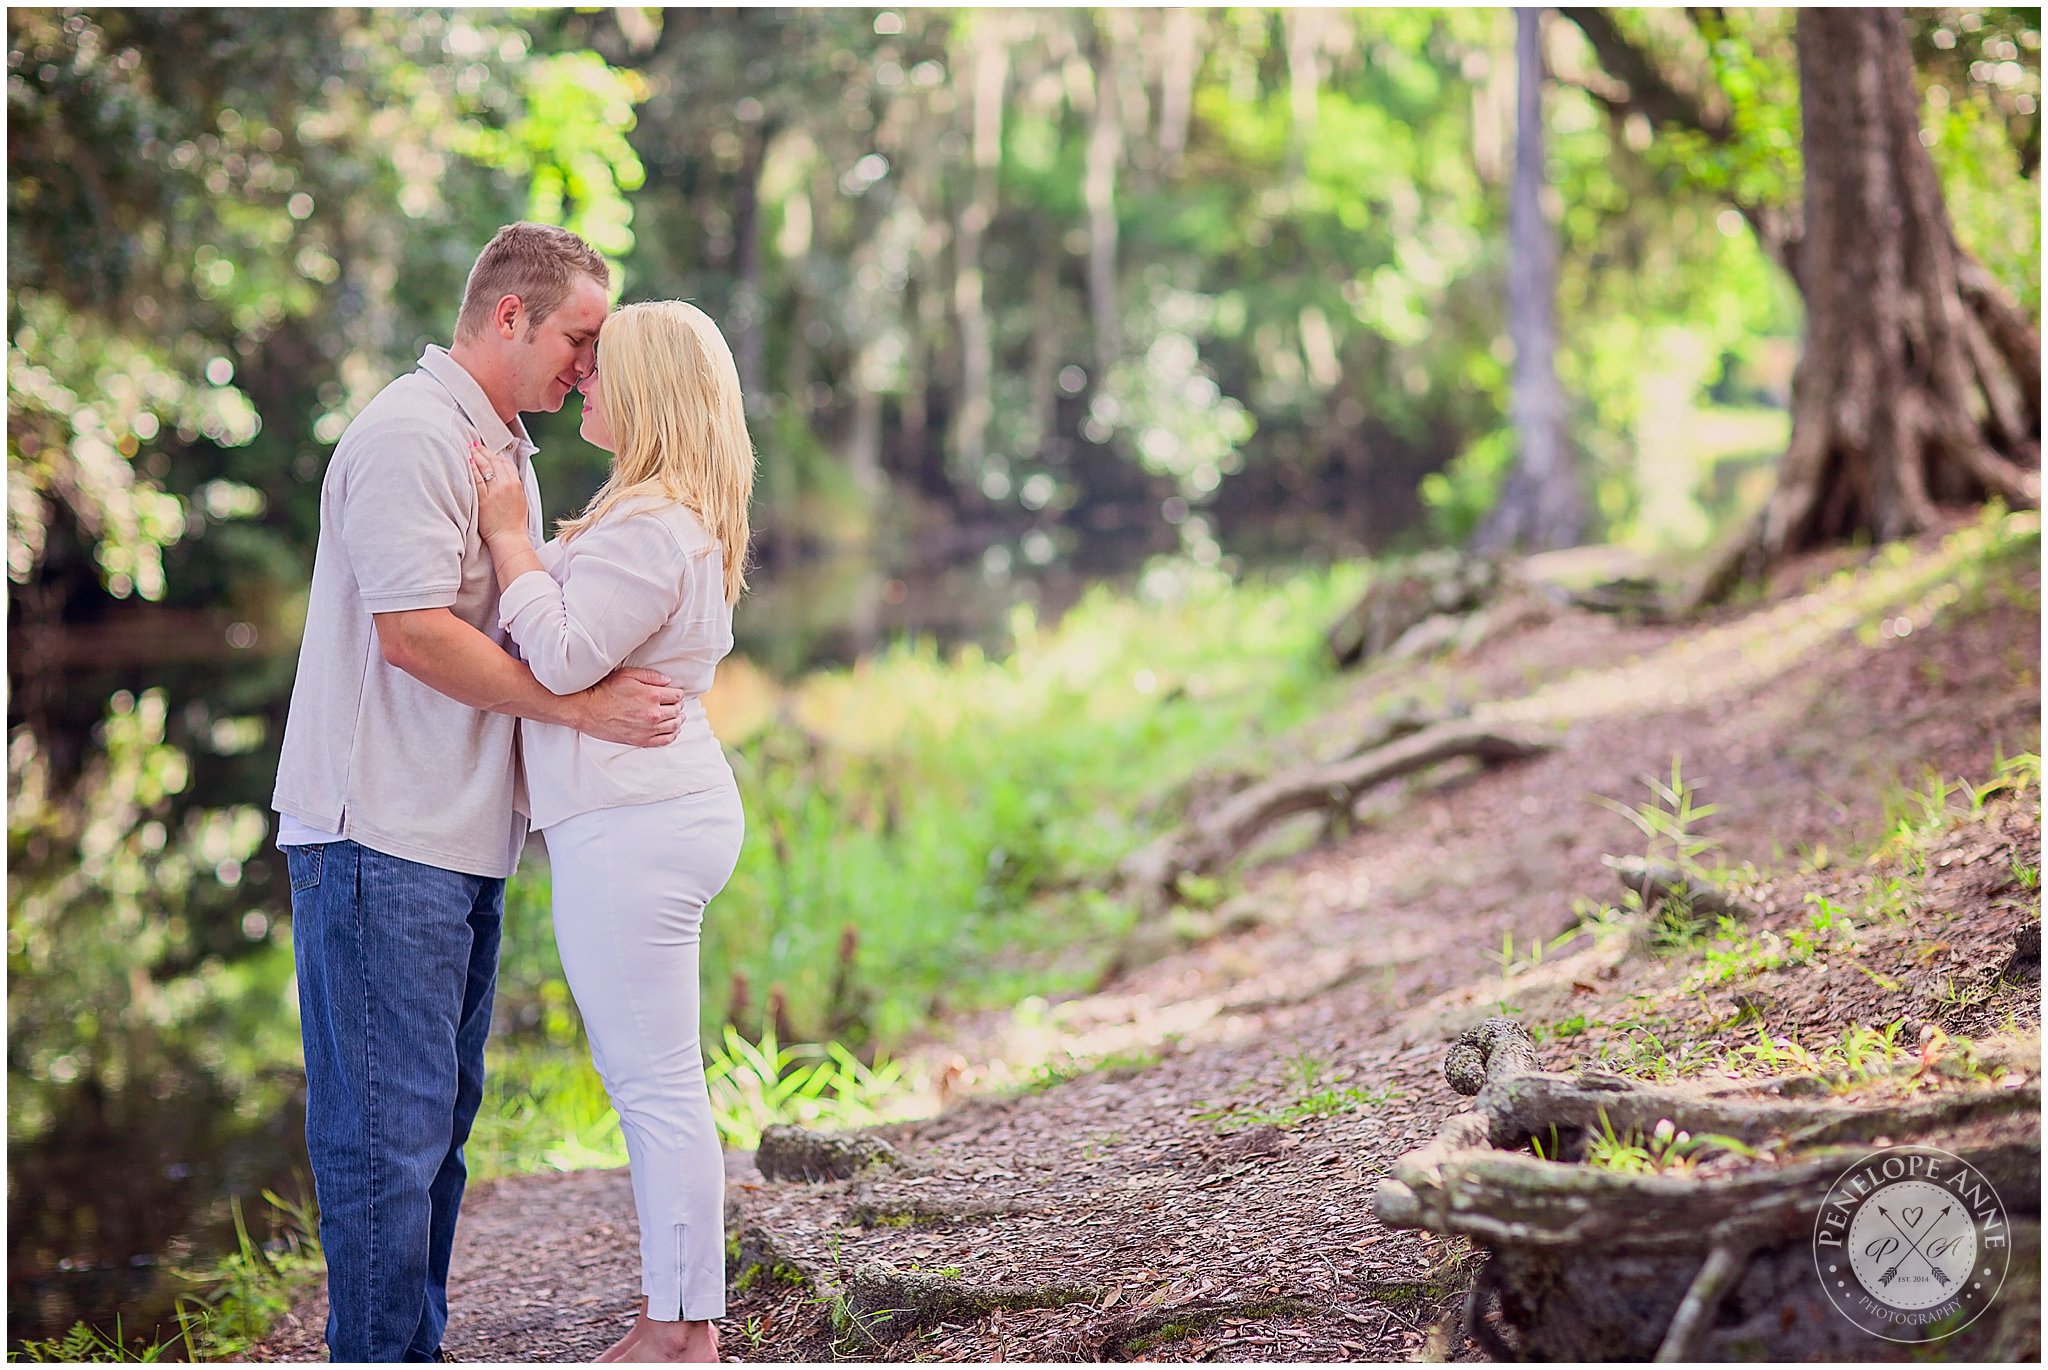 Bride and Groom at Moss Park Engagement Session